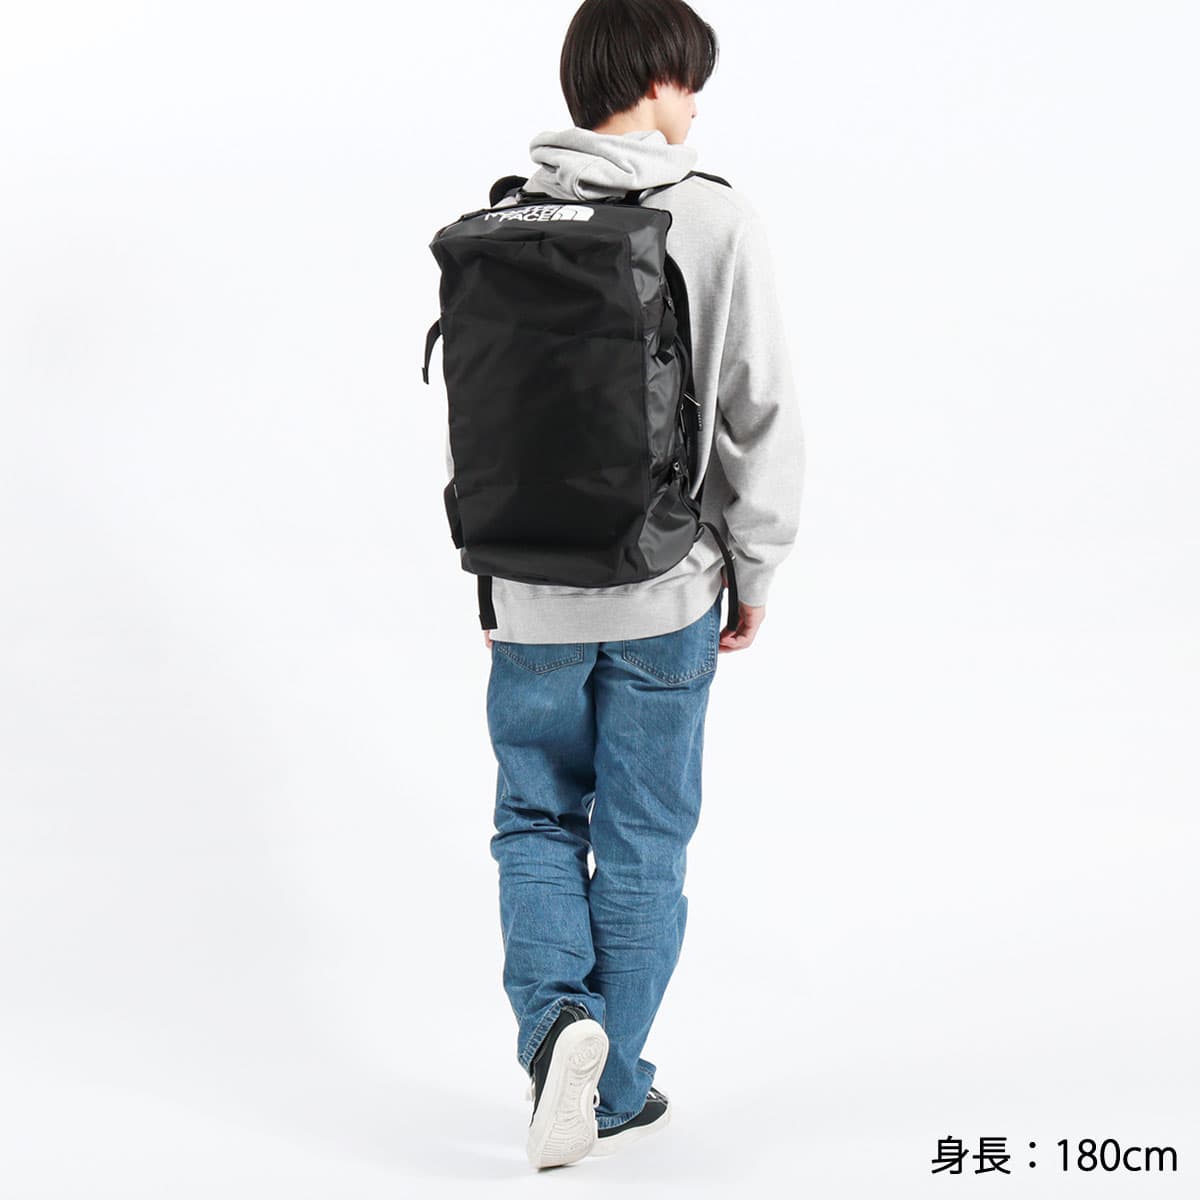 THE NORTH FACE / BC DUFFEL XS